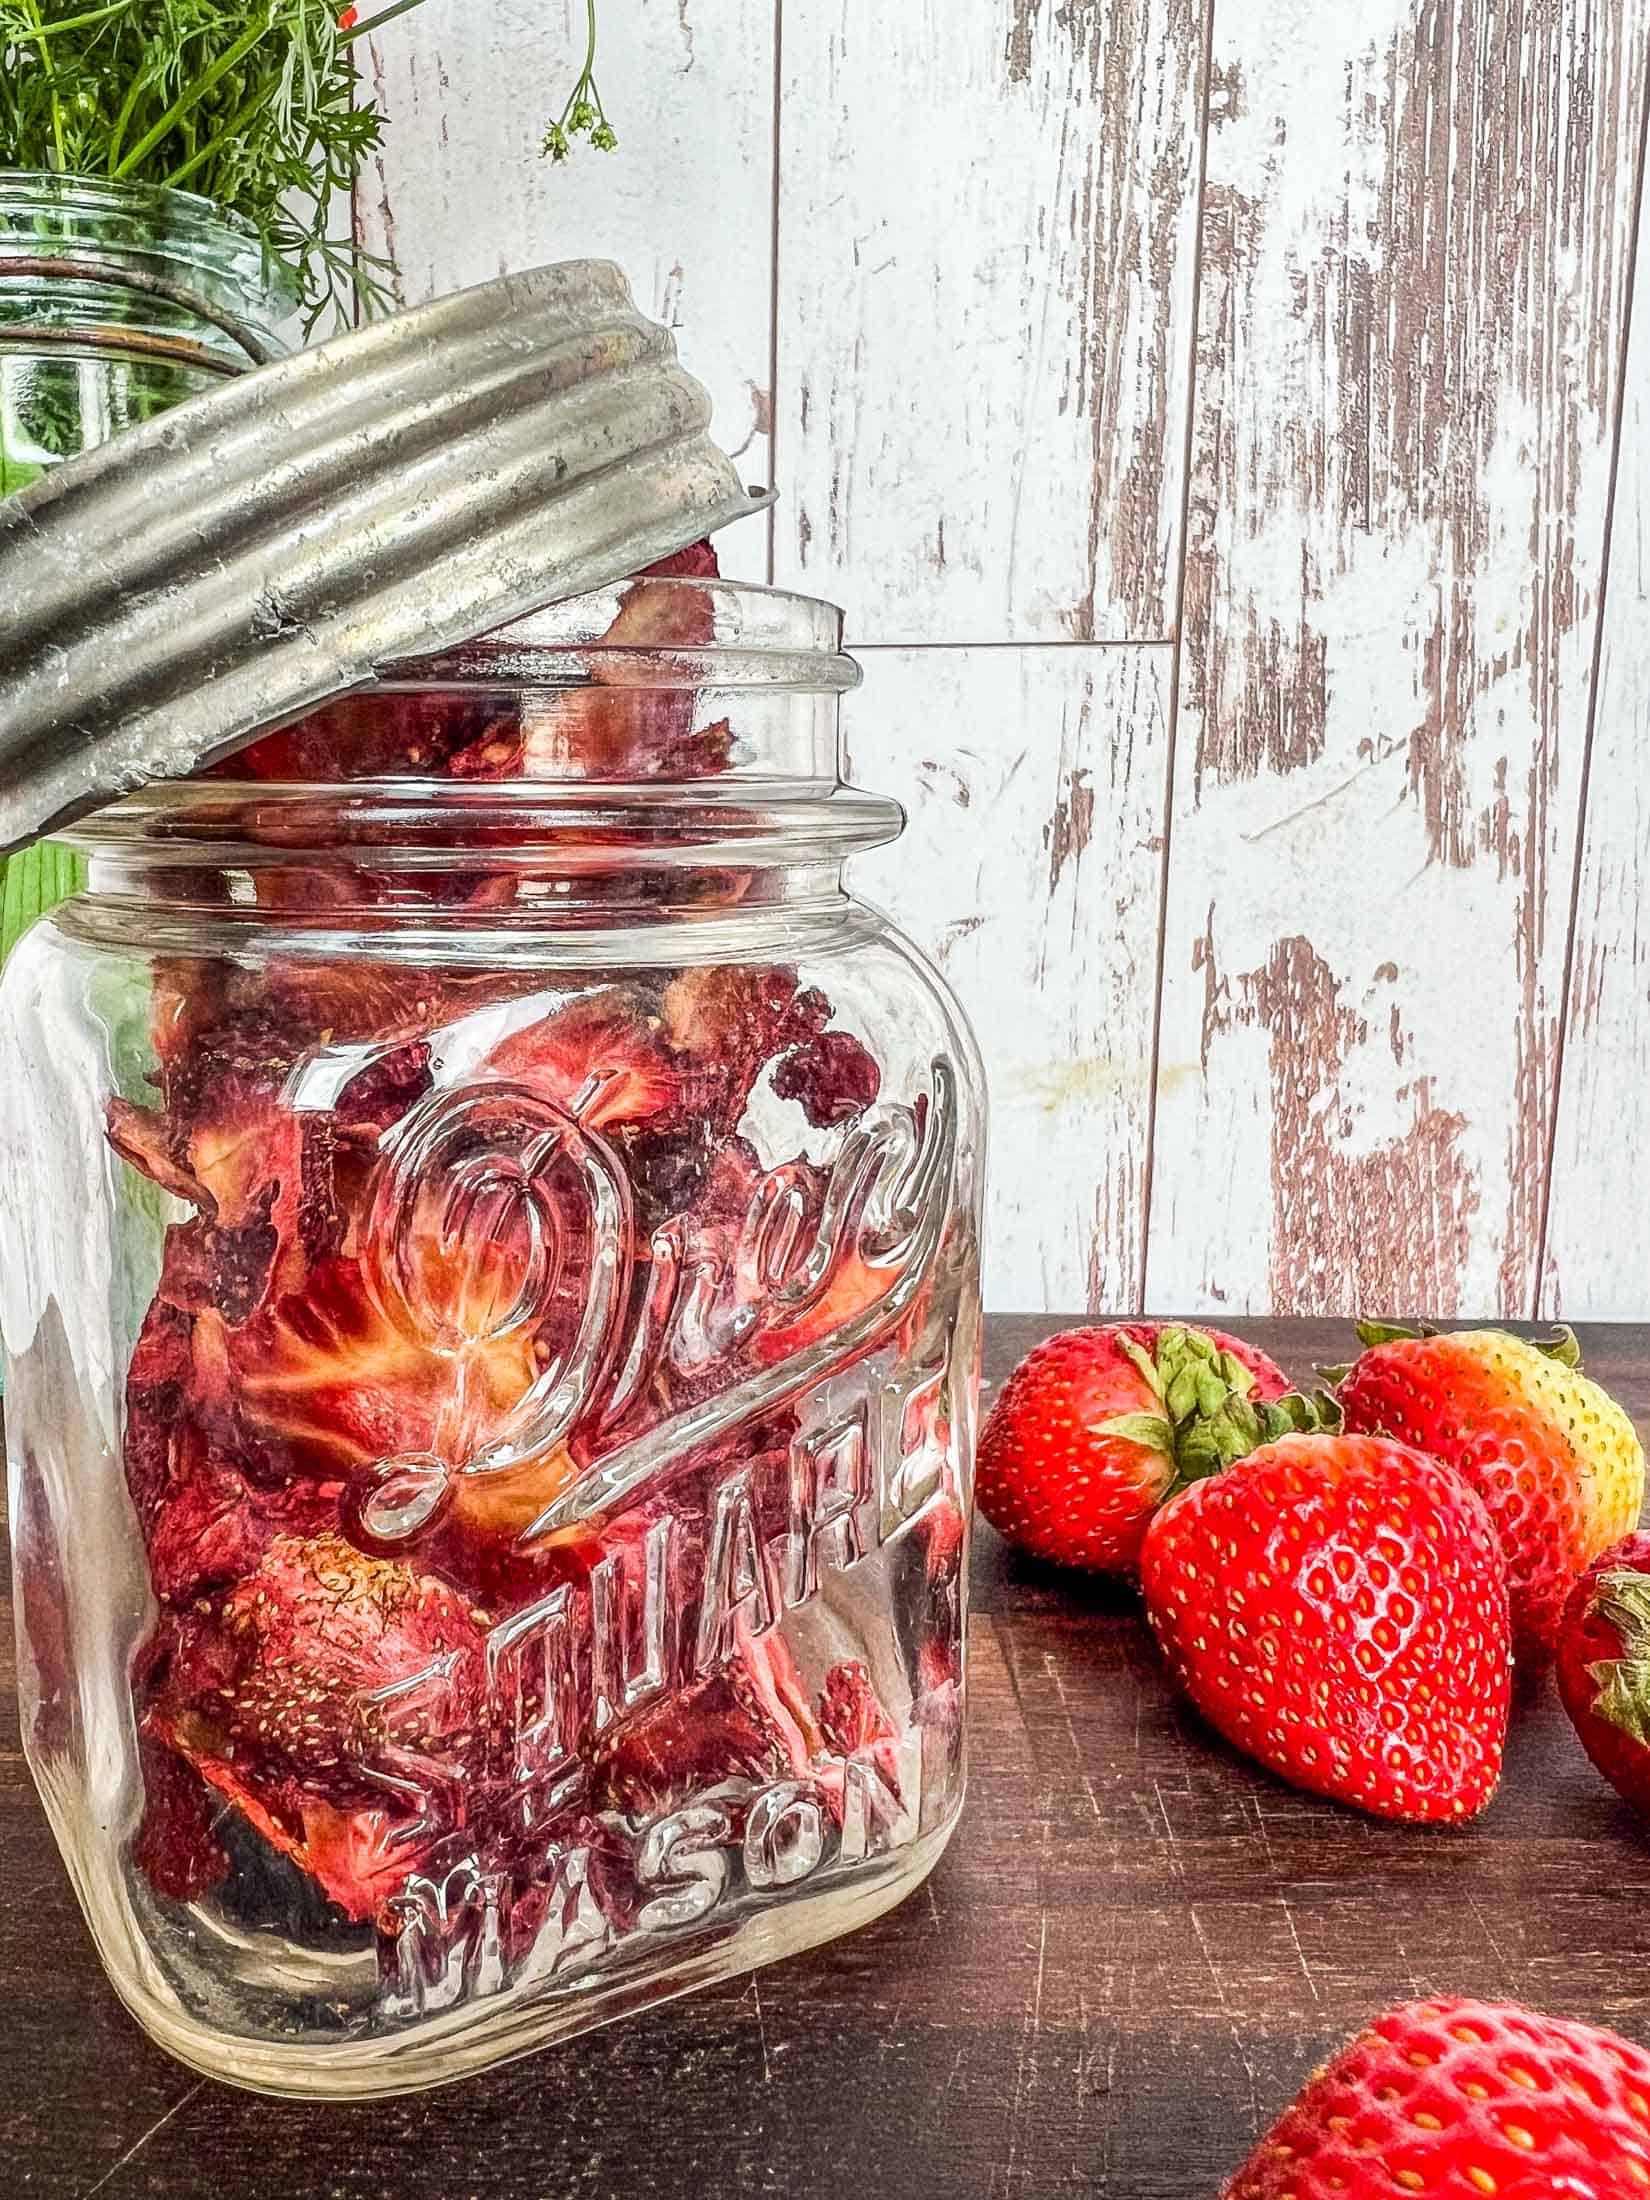 Dried strawberries in a decorative antique jar with a metal lid loosely hanging off of the rim.